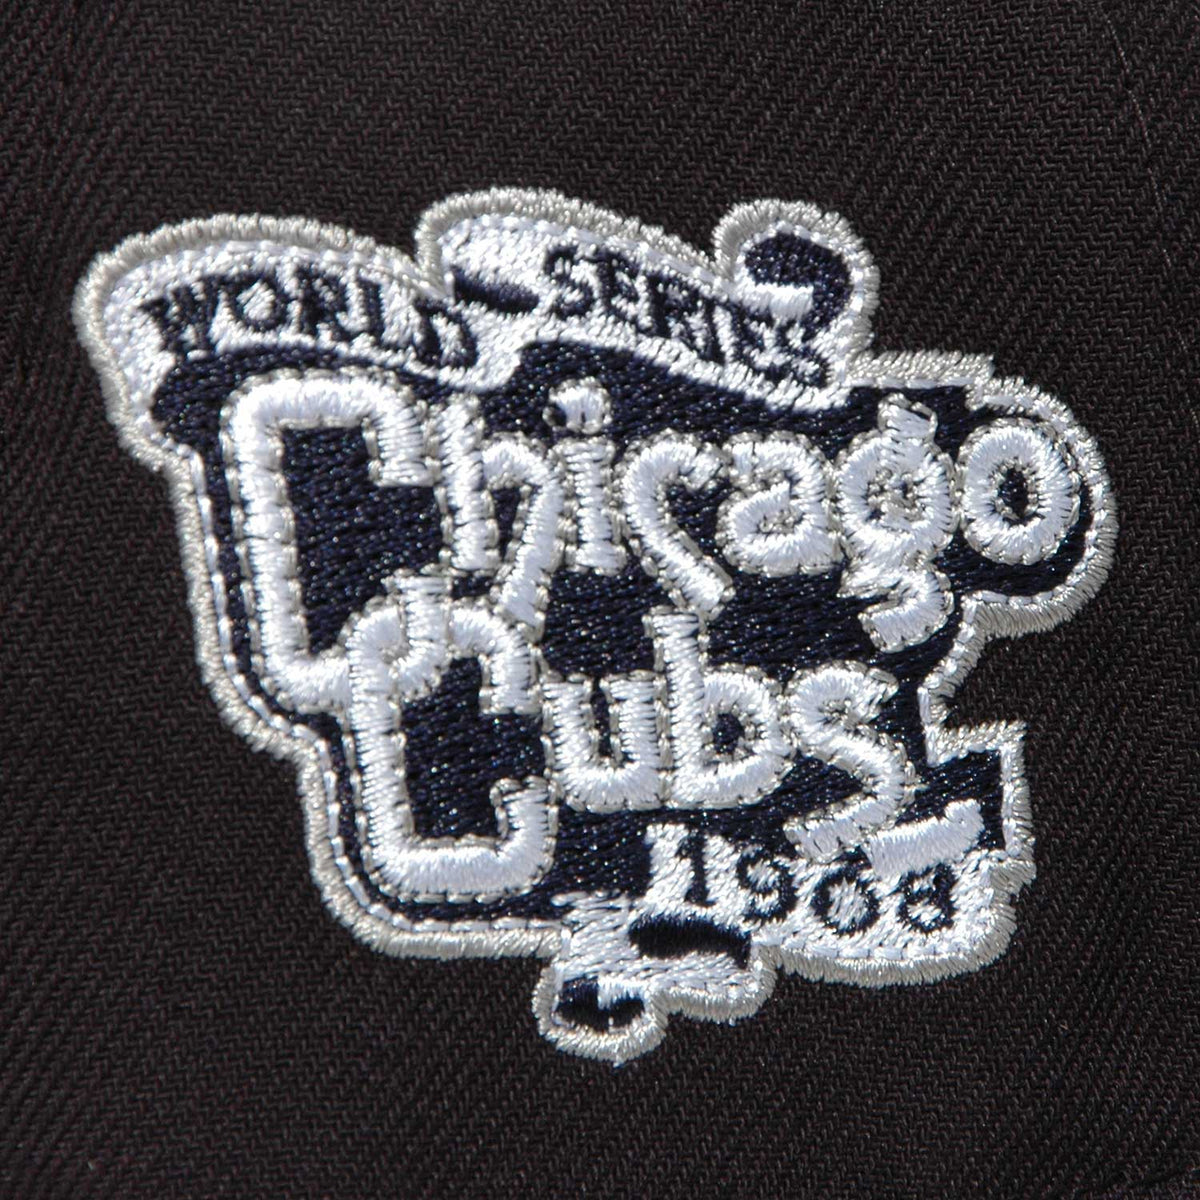 Chicago Cubs New Era 1908 World Series Champions Cooperstown